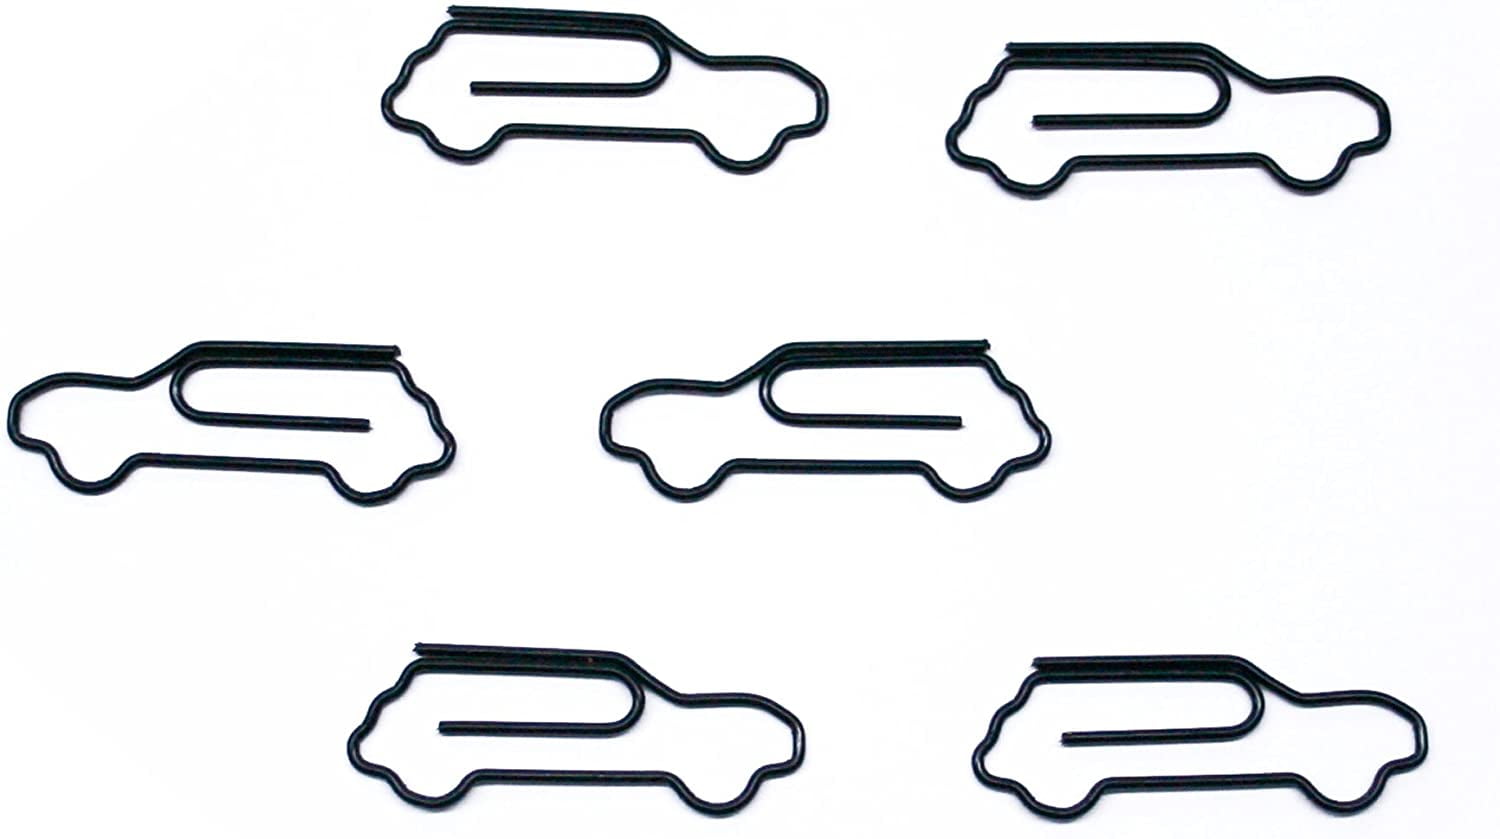 100 Count Black Car Shaped Paper Clips, Car Lover Cute Gifts, Office  Supplies, Desk Organization